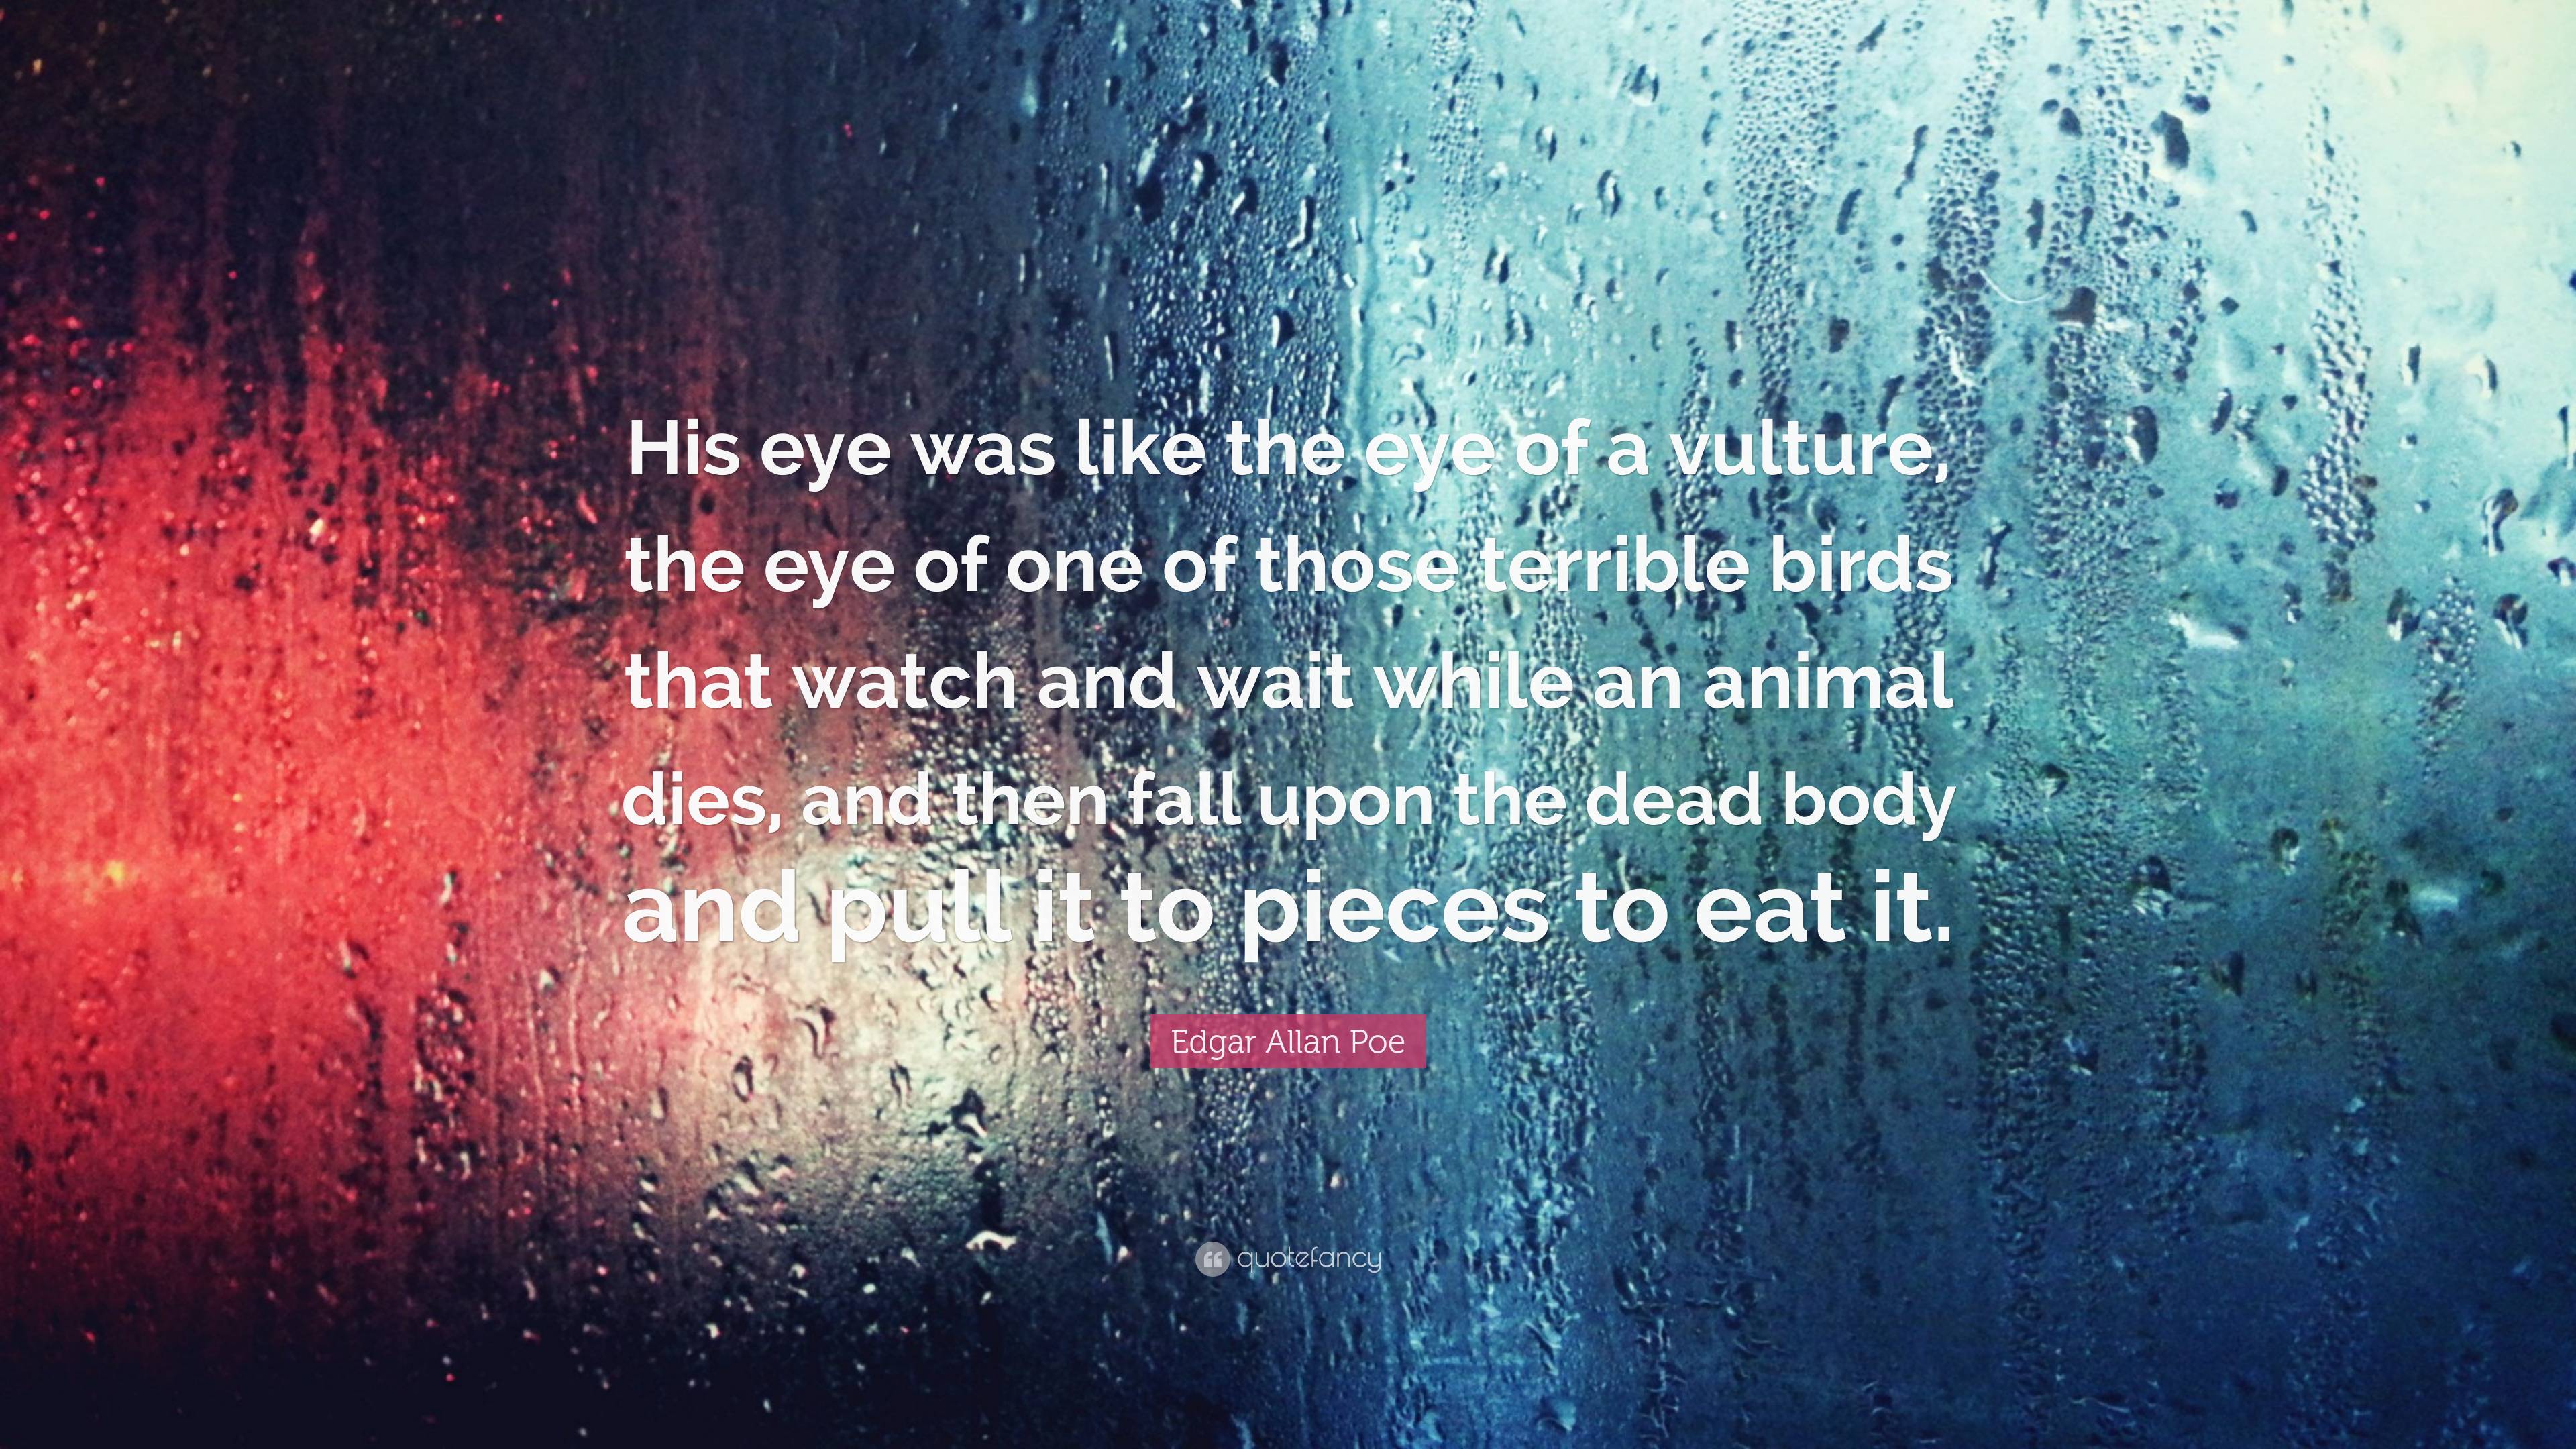 Edgar Allan Poe Quote: “His eye was like the eye of a vulture, the eye ...